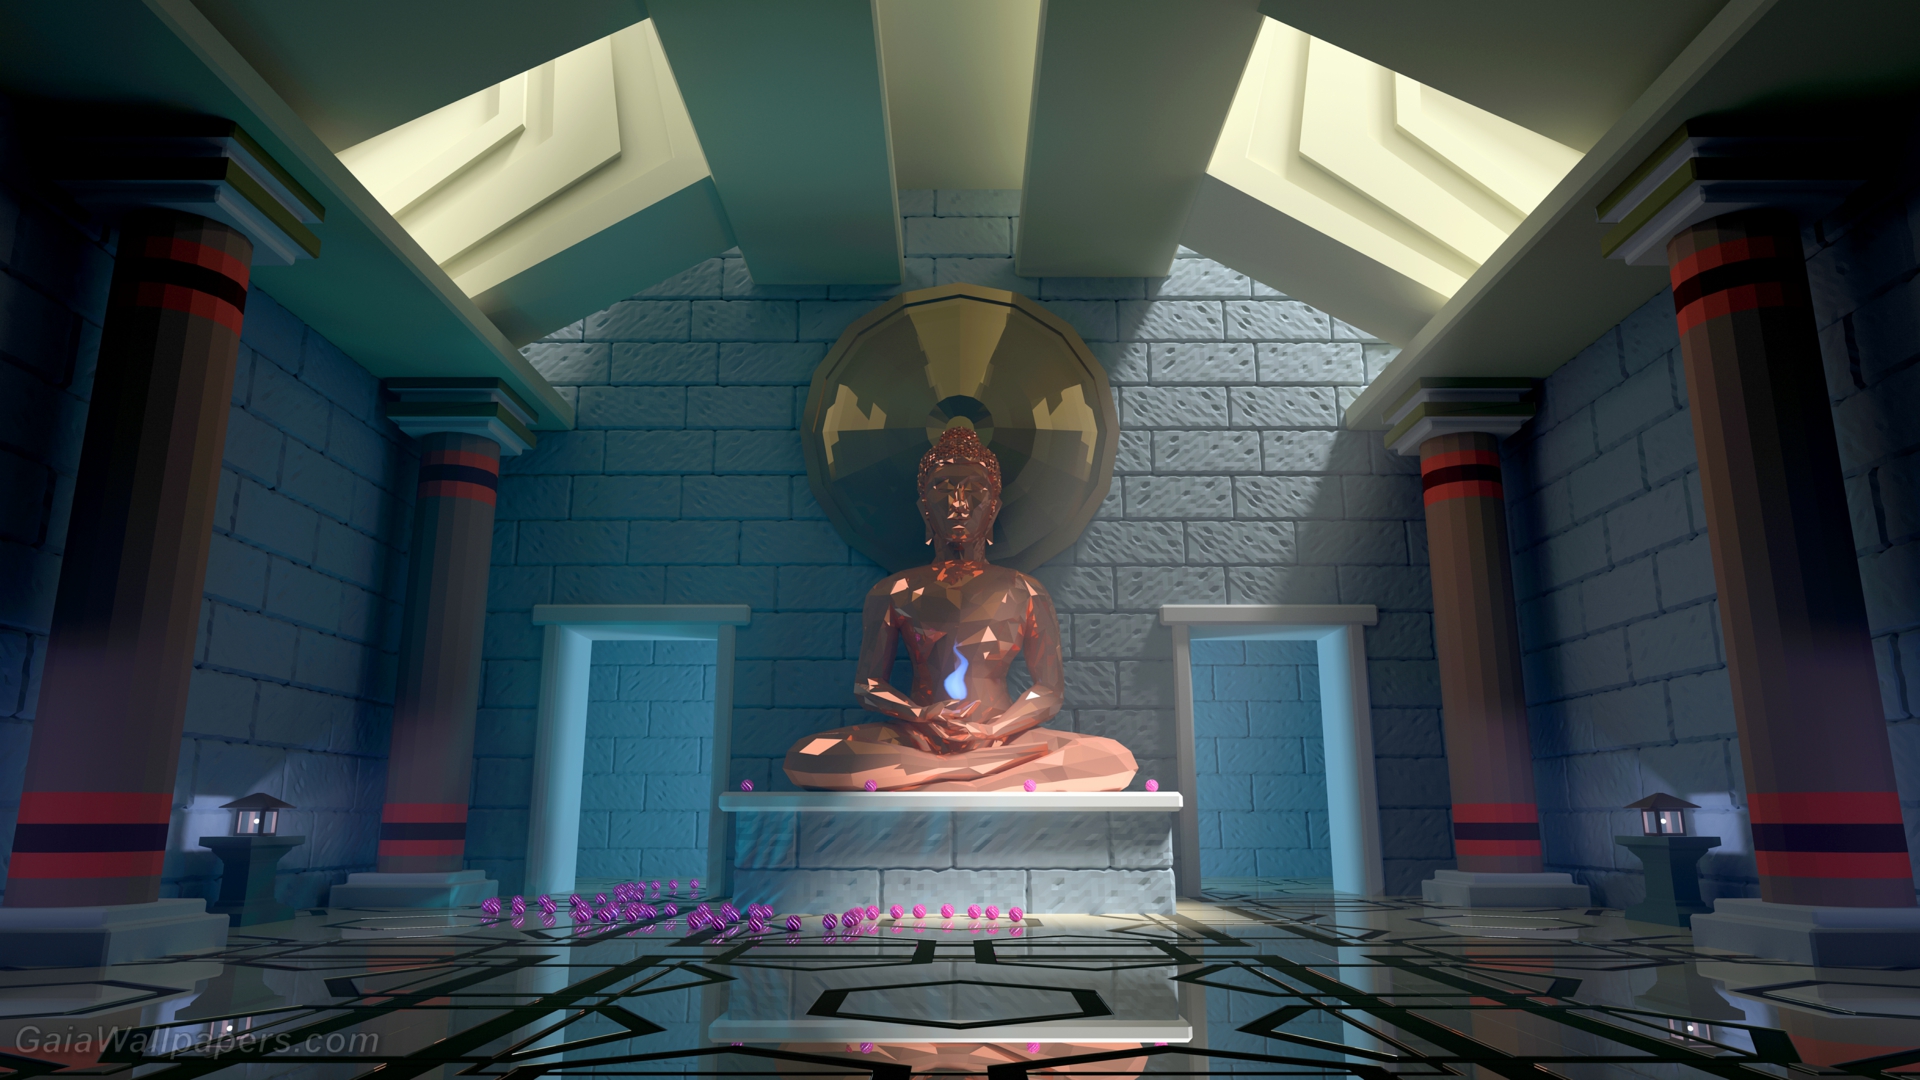 Avatar in his magnificent temple - Free desktop wallpapers